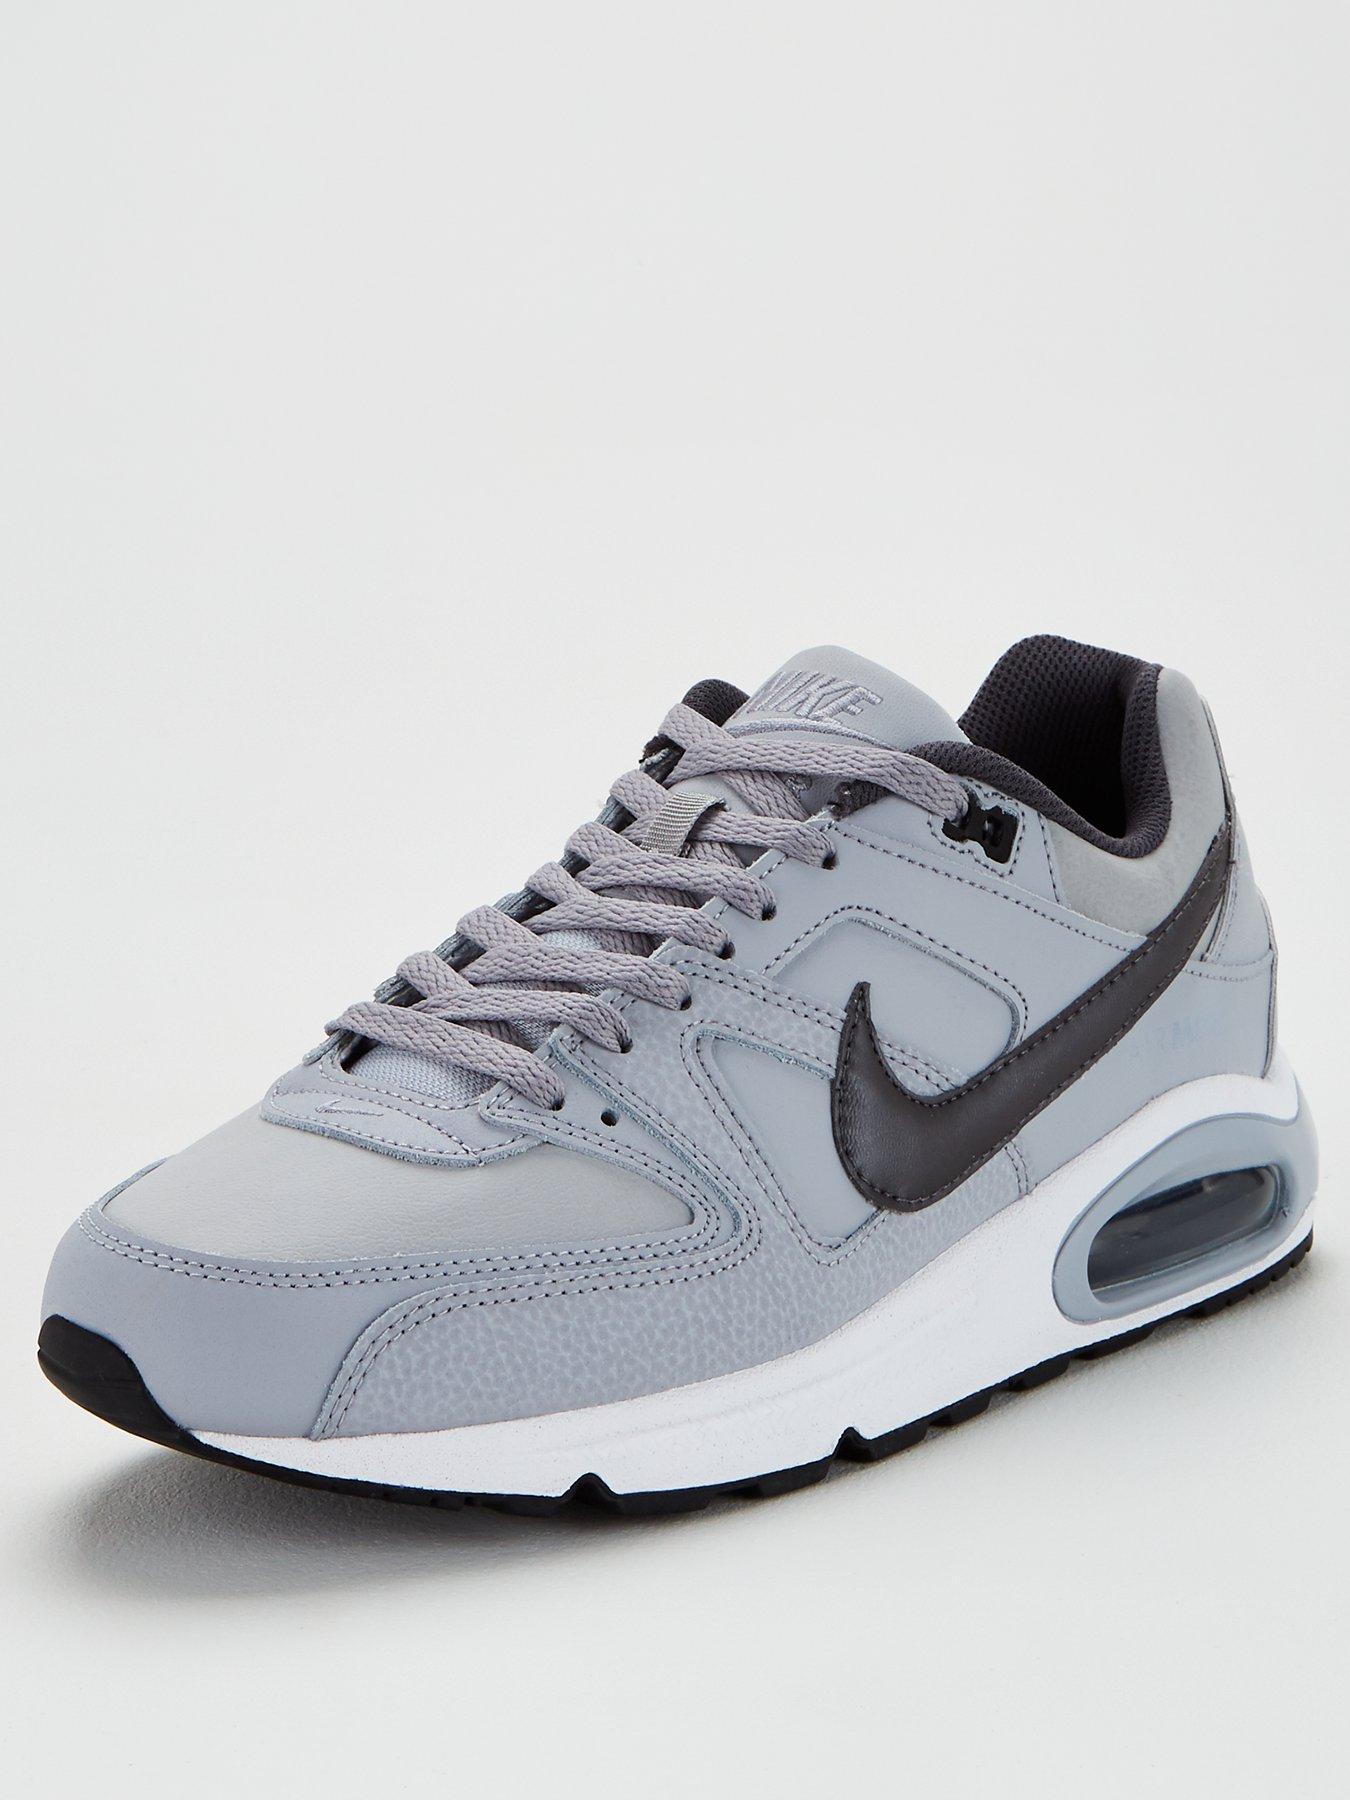 nike air command leather grey